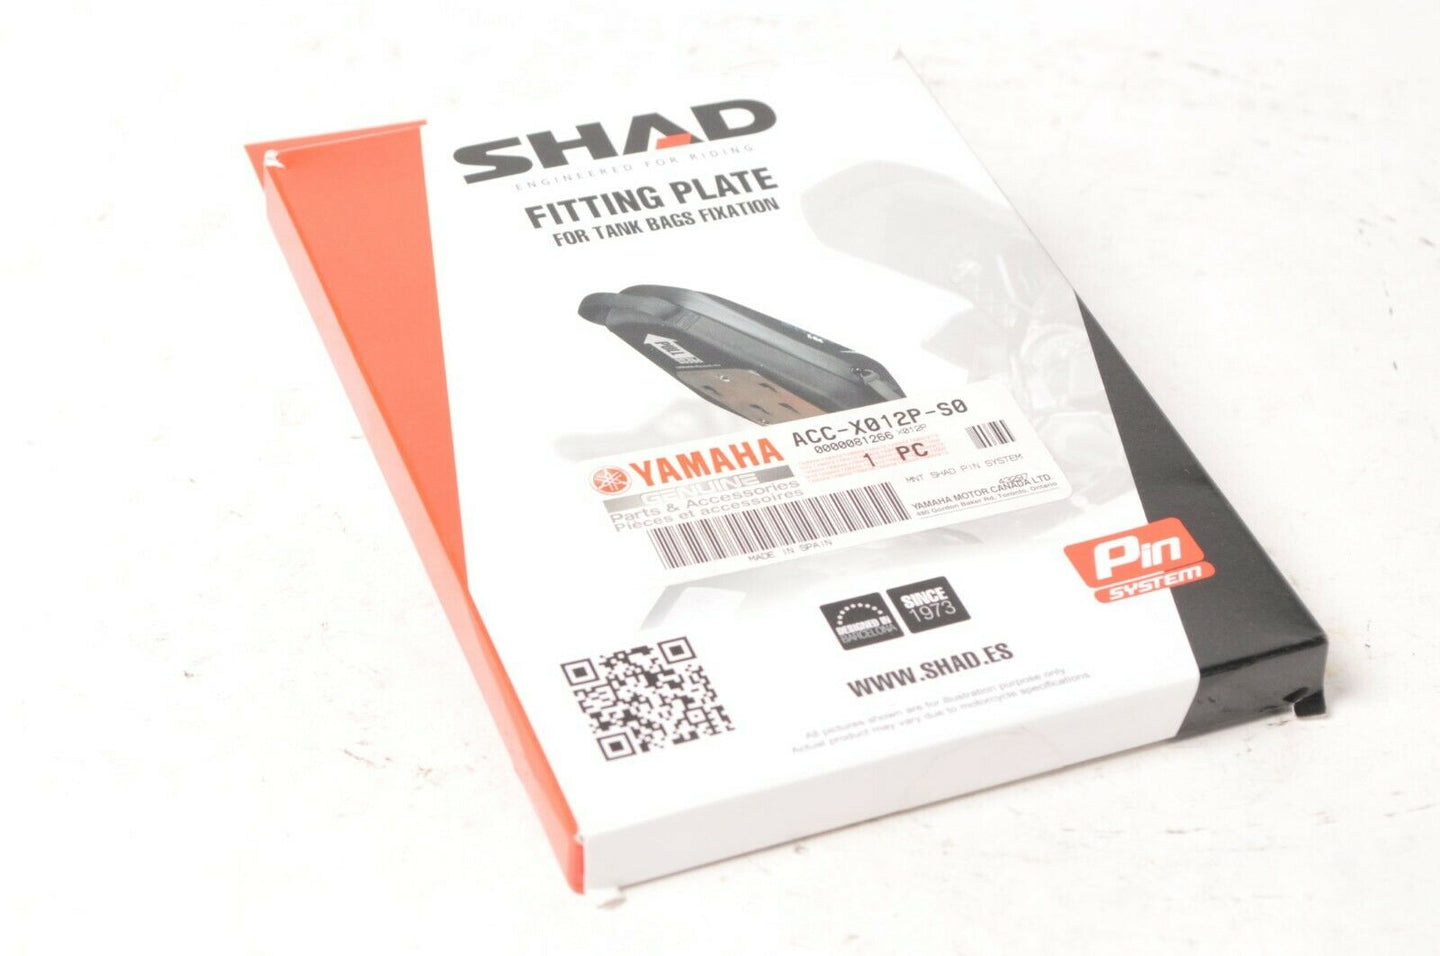 SHAD X012PS Fitting Plate pin system Yamaha YM2 for tank bag MT-07 kit